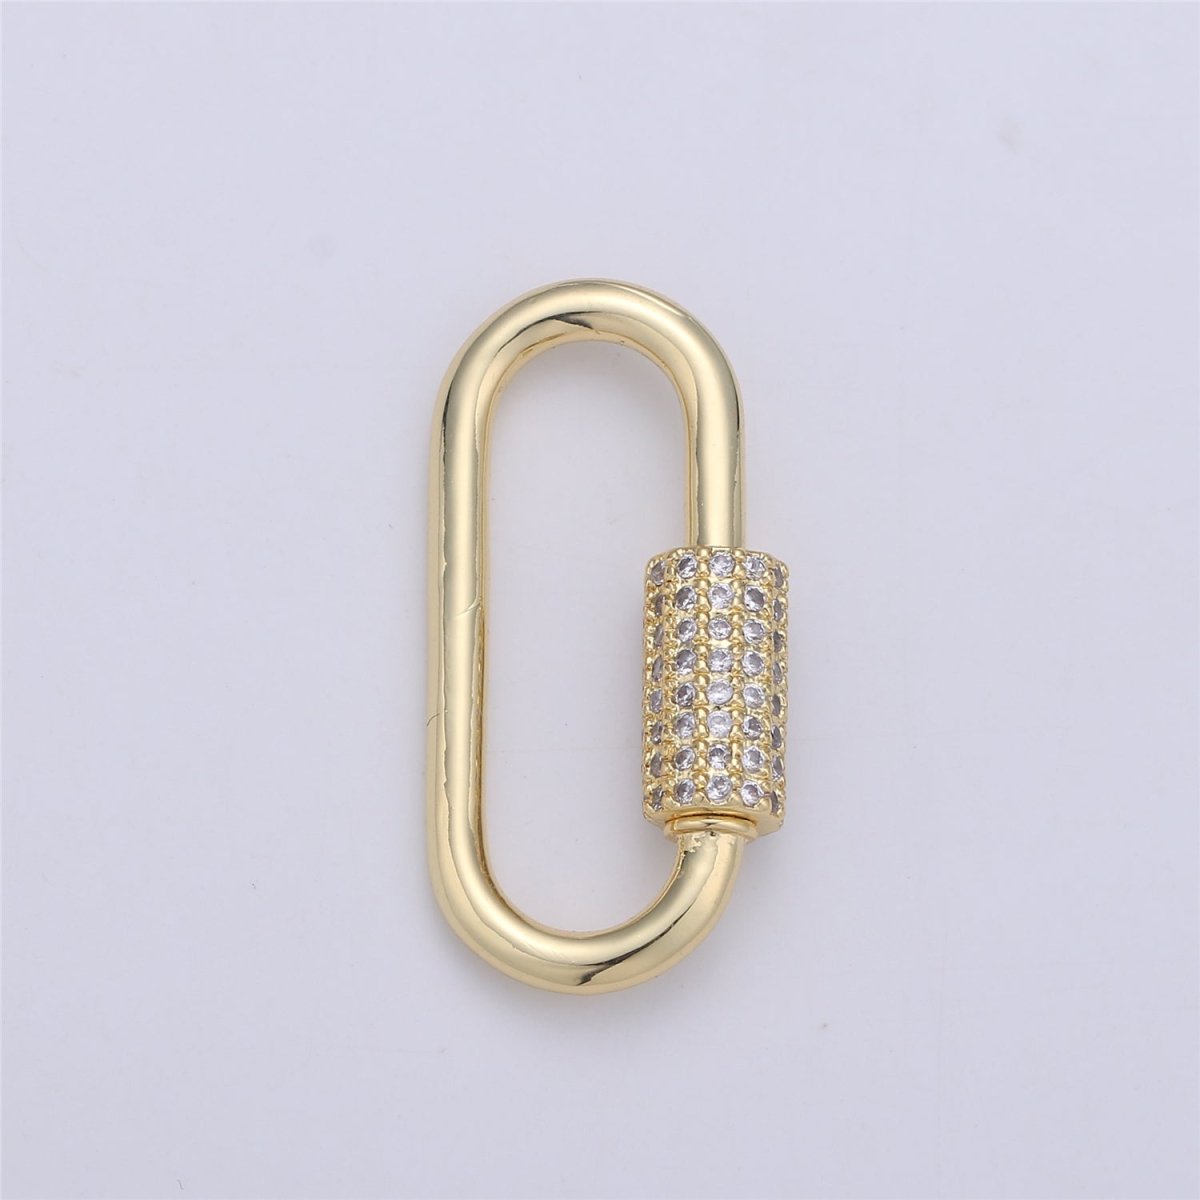 OS 24K Gold-Plated Paperclip Carabiner, Circular Screw Clasp with Pave Cubic Zirconia Rhinestones K-391 - DLUXCA